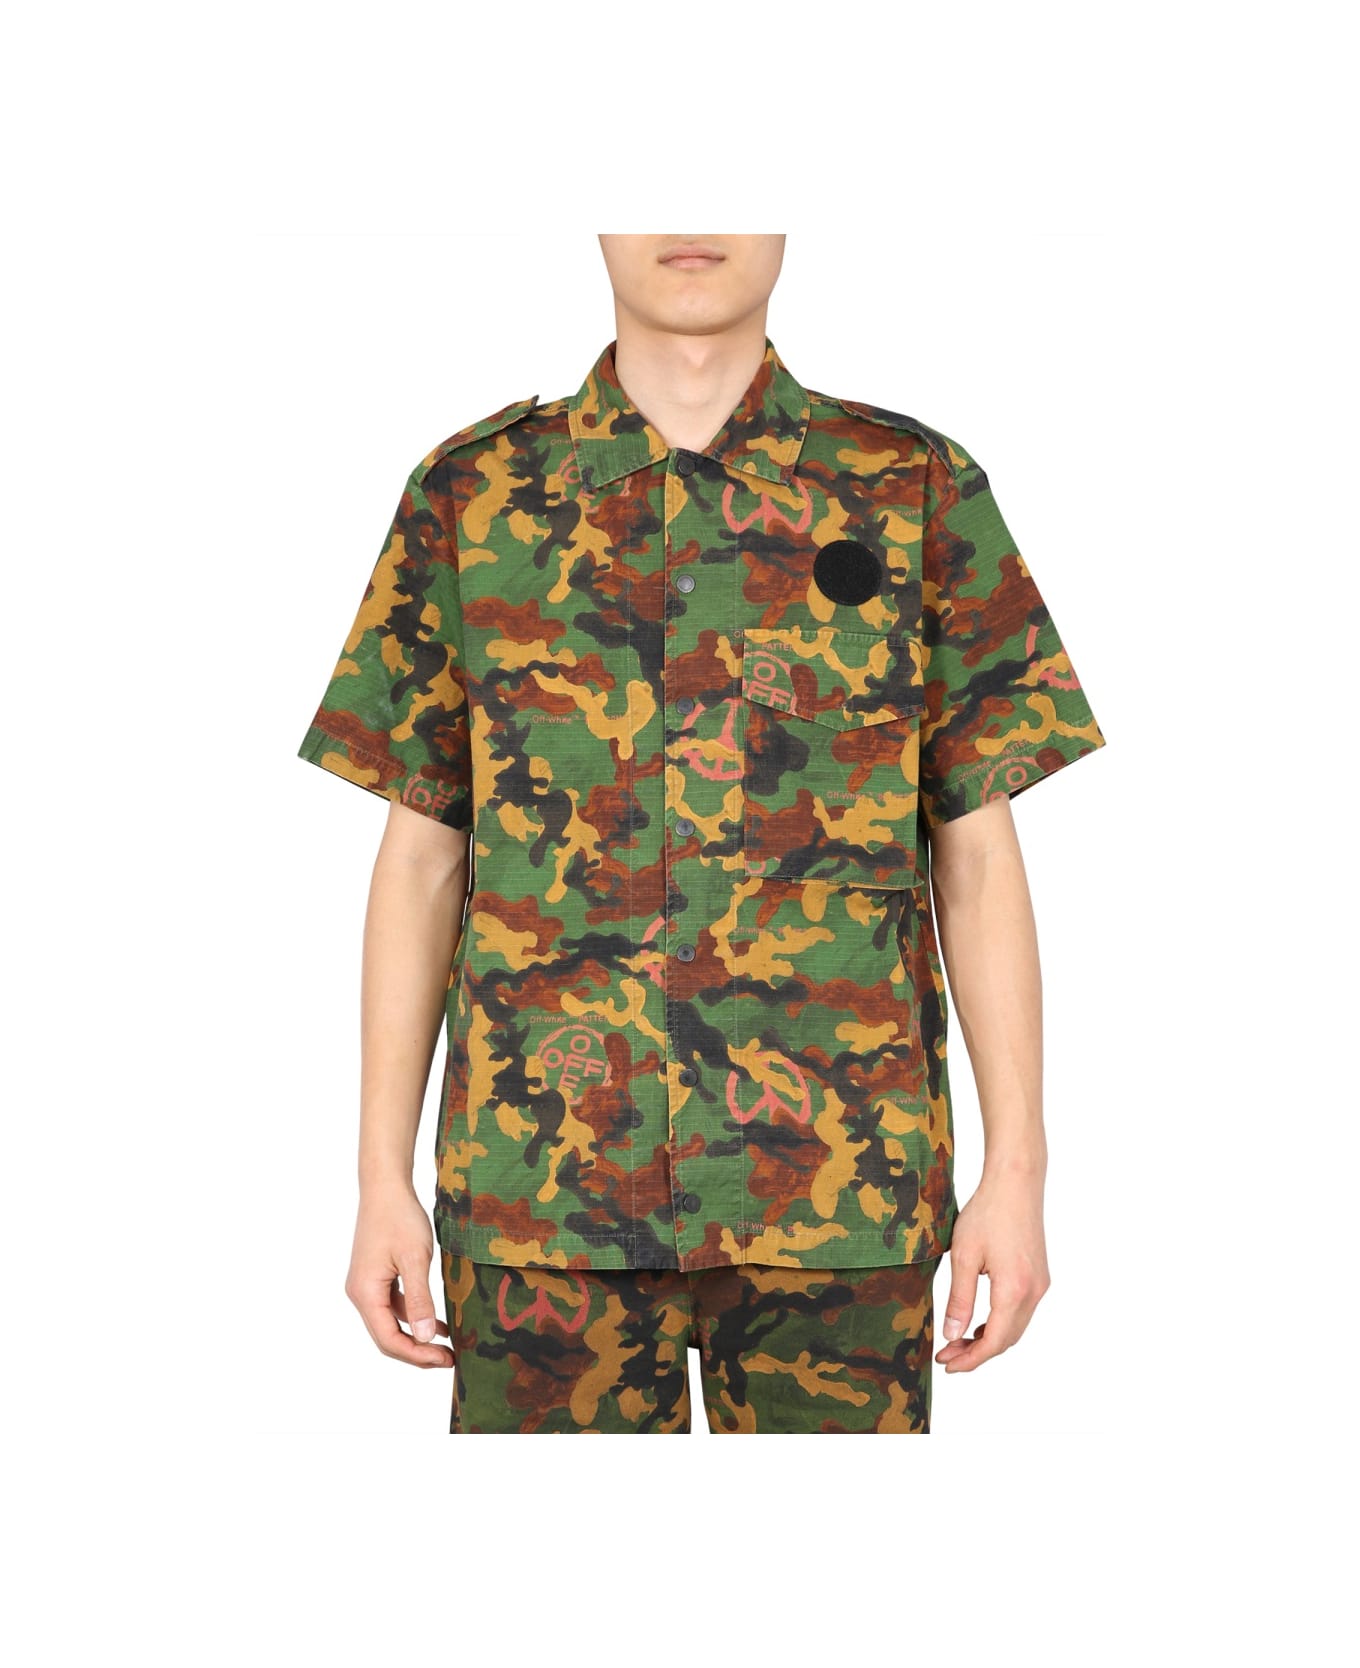 Off-White Camouflage Shirt - MILITARY GREEN シャツ